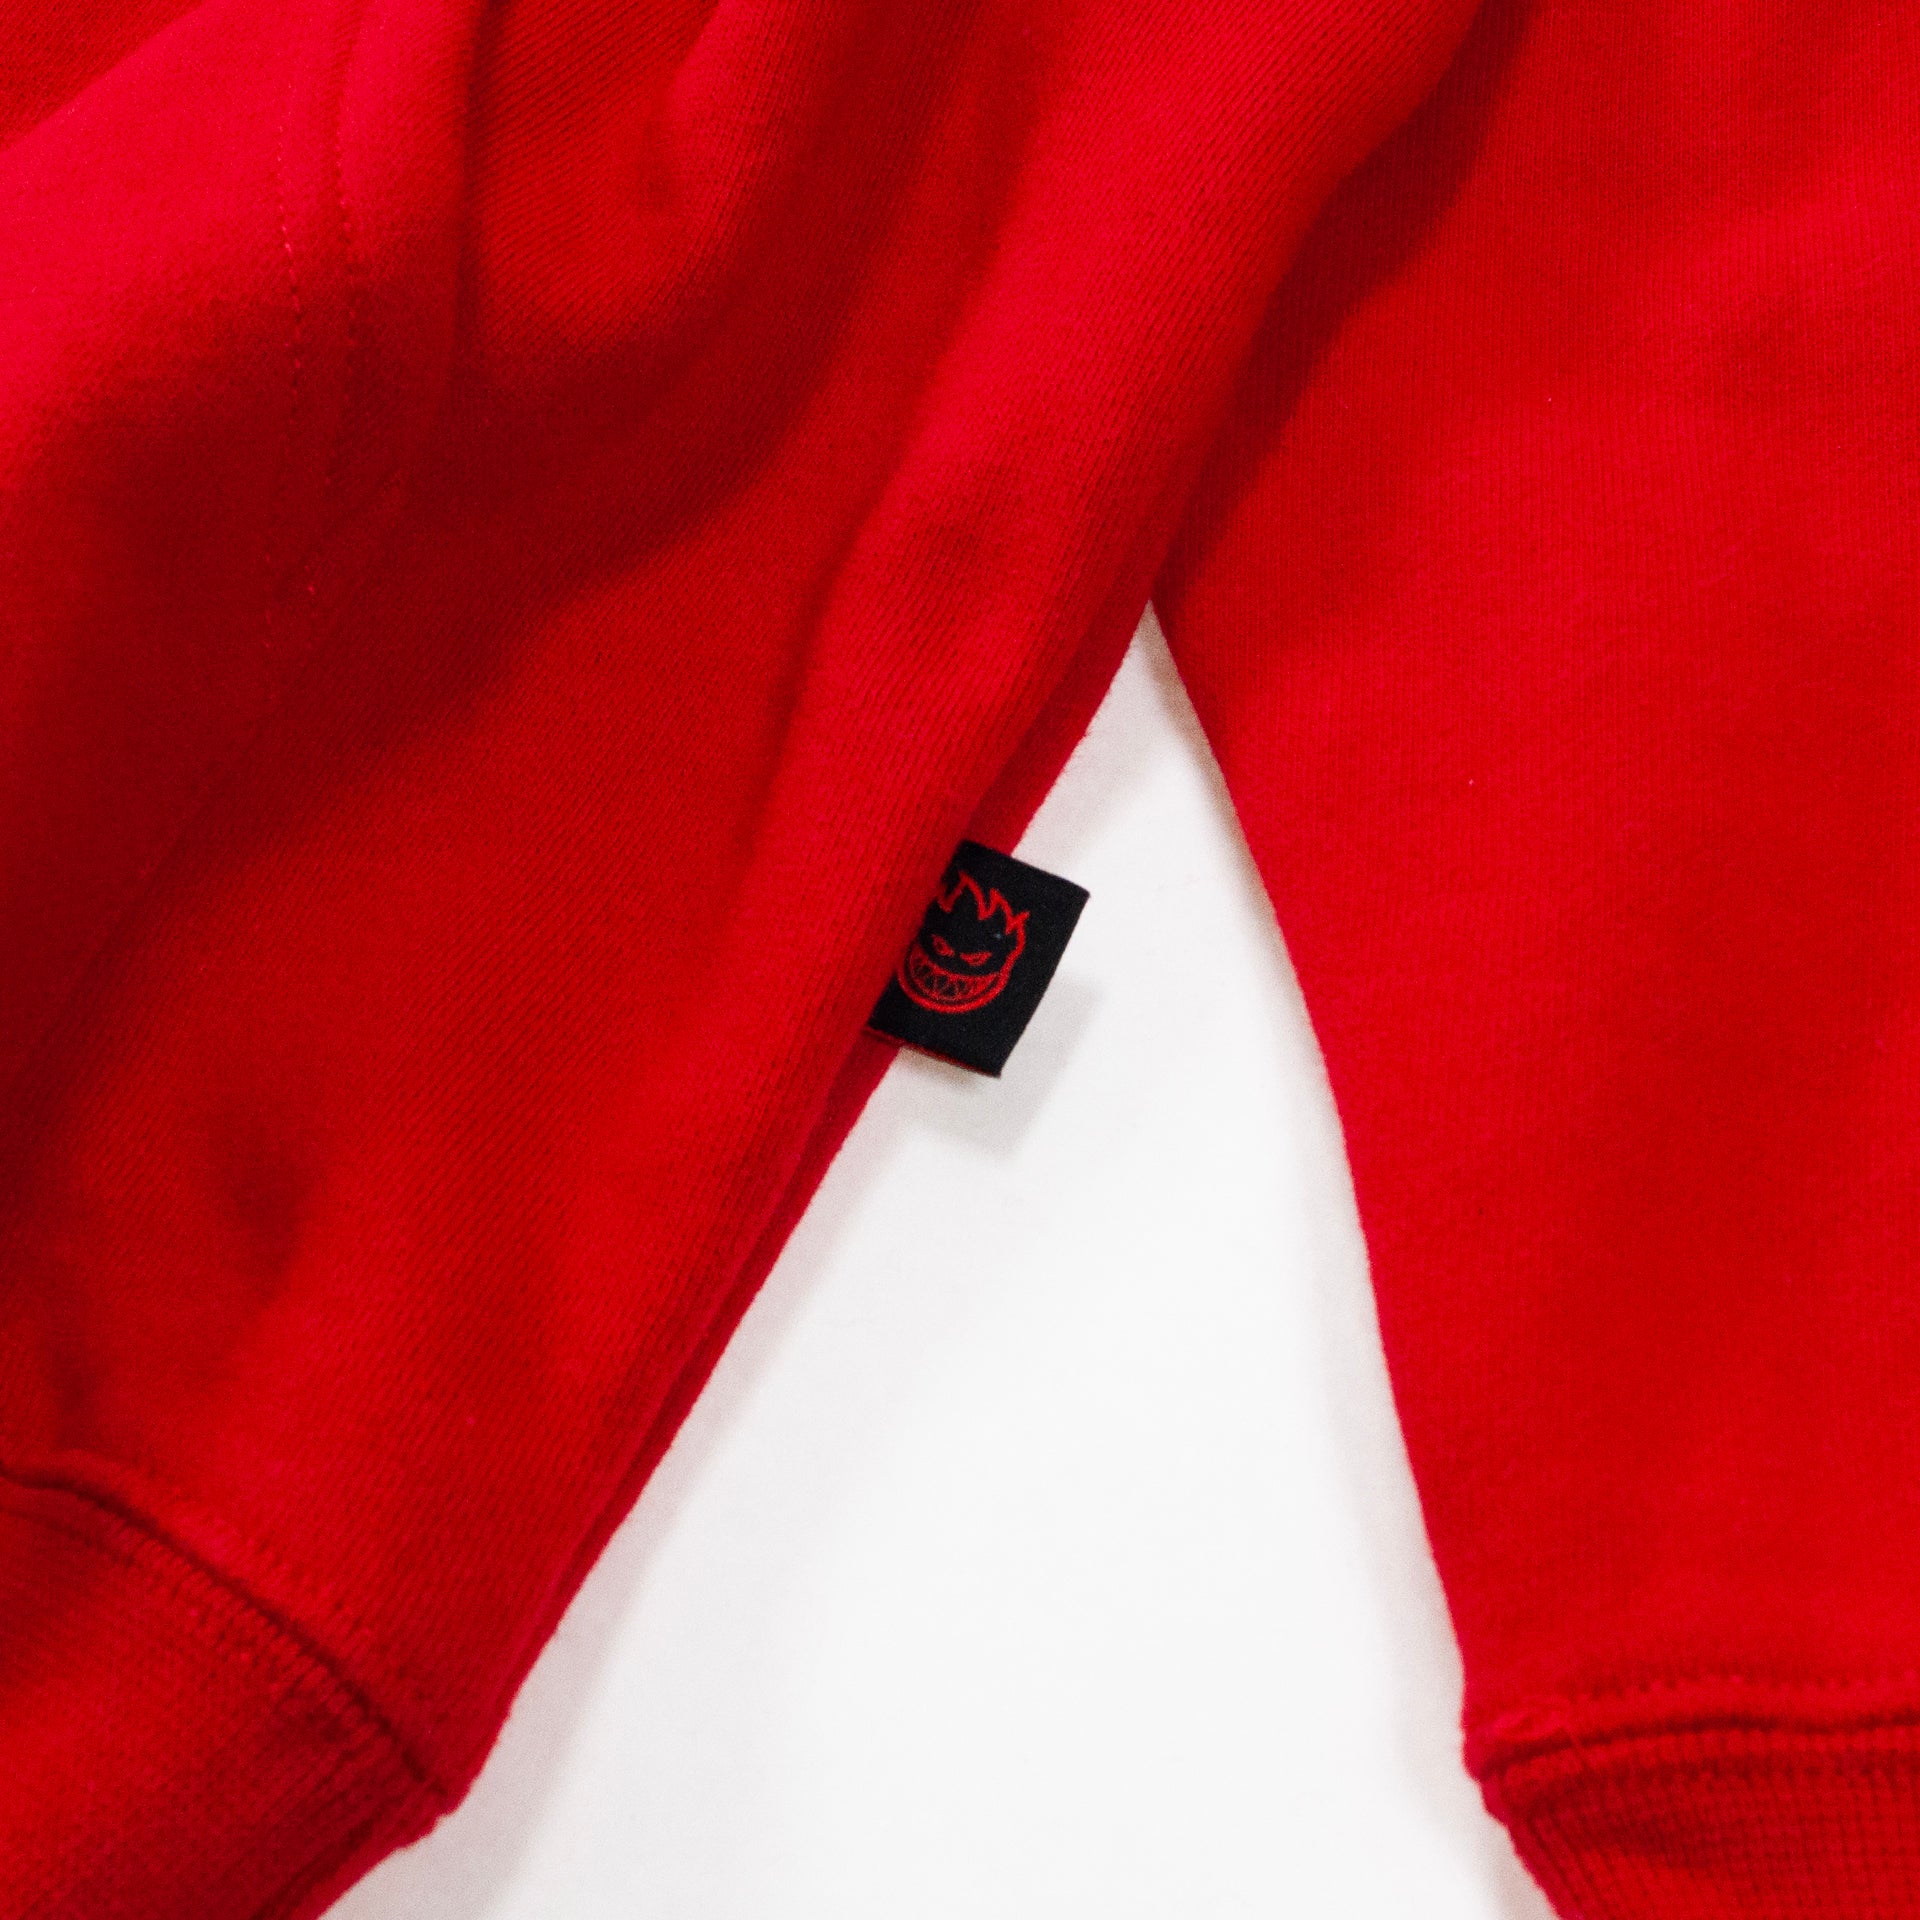 Spitfire Old E Zipped Hooded Sweat - Red/ Black/ White - Prime Delux Store